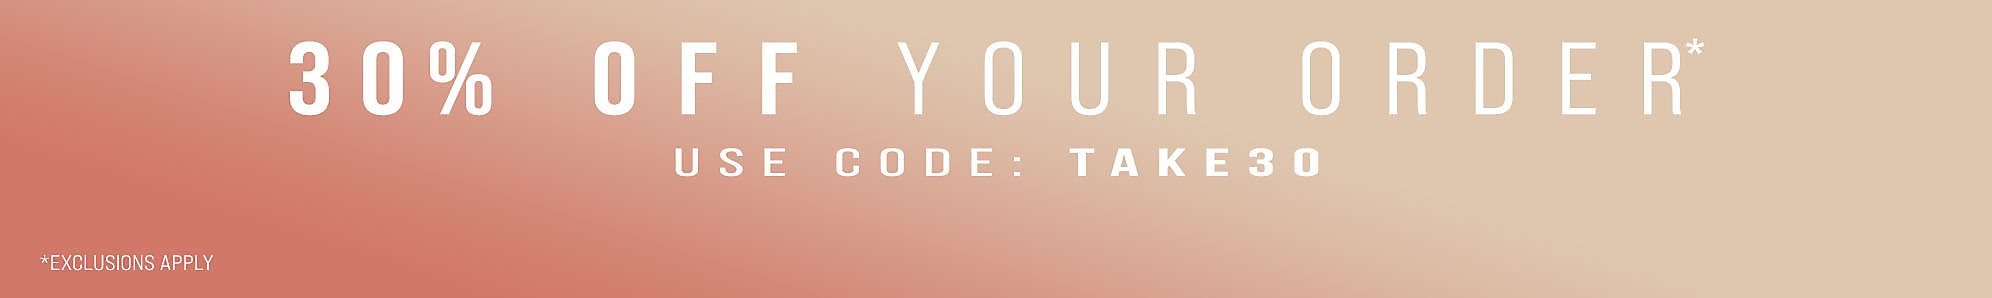 30% Off Your Order* With Code TAKE30